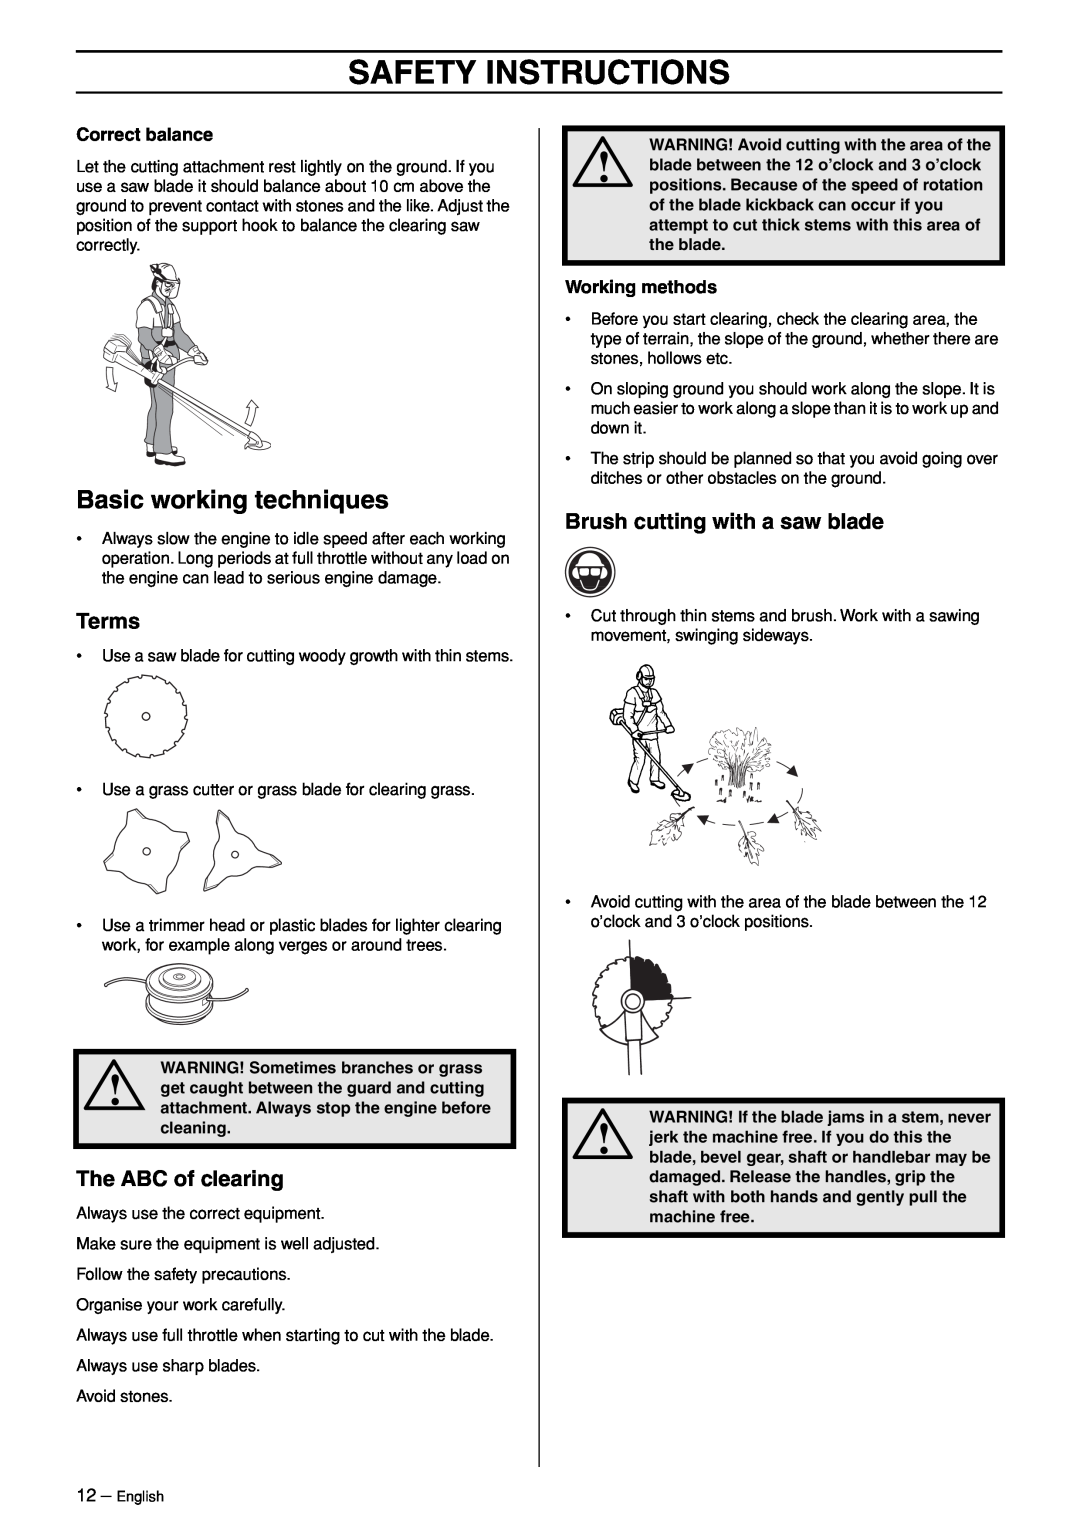 Husqvarna 324RX-Series manual Basic working techniques, Safety Instructions, Correct balance, Working methods 